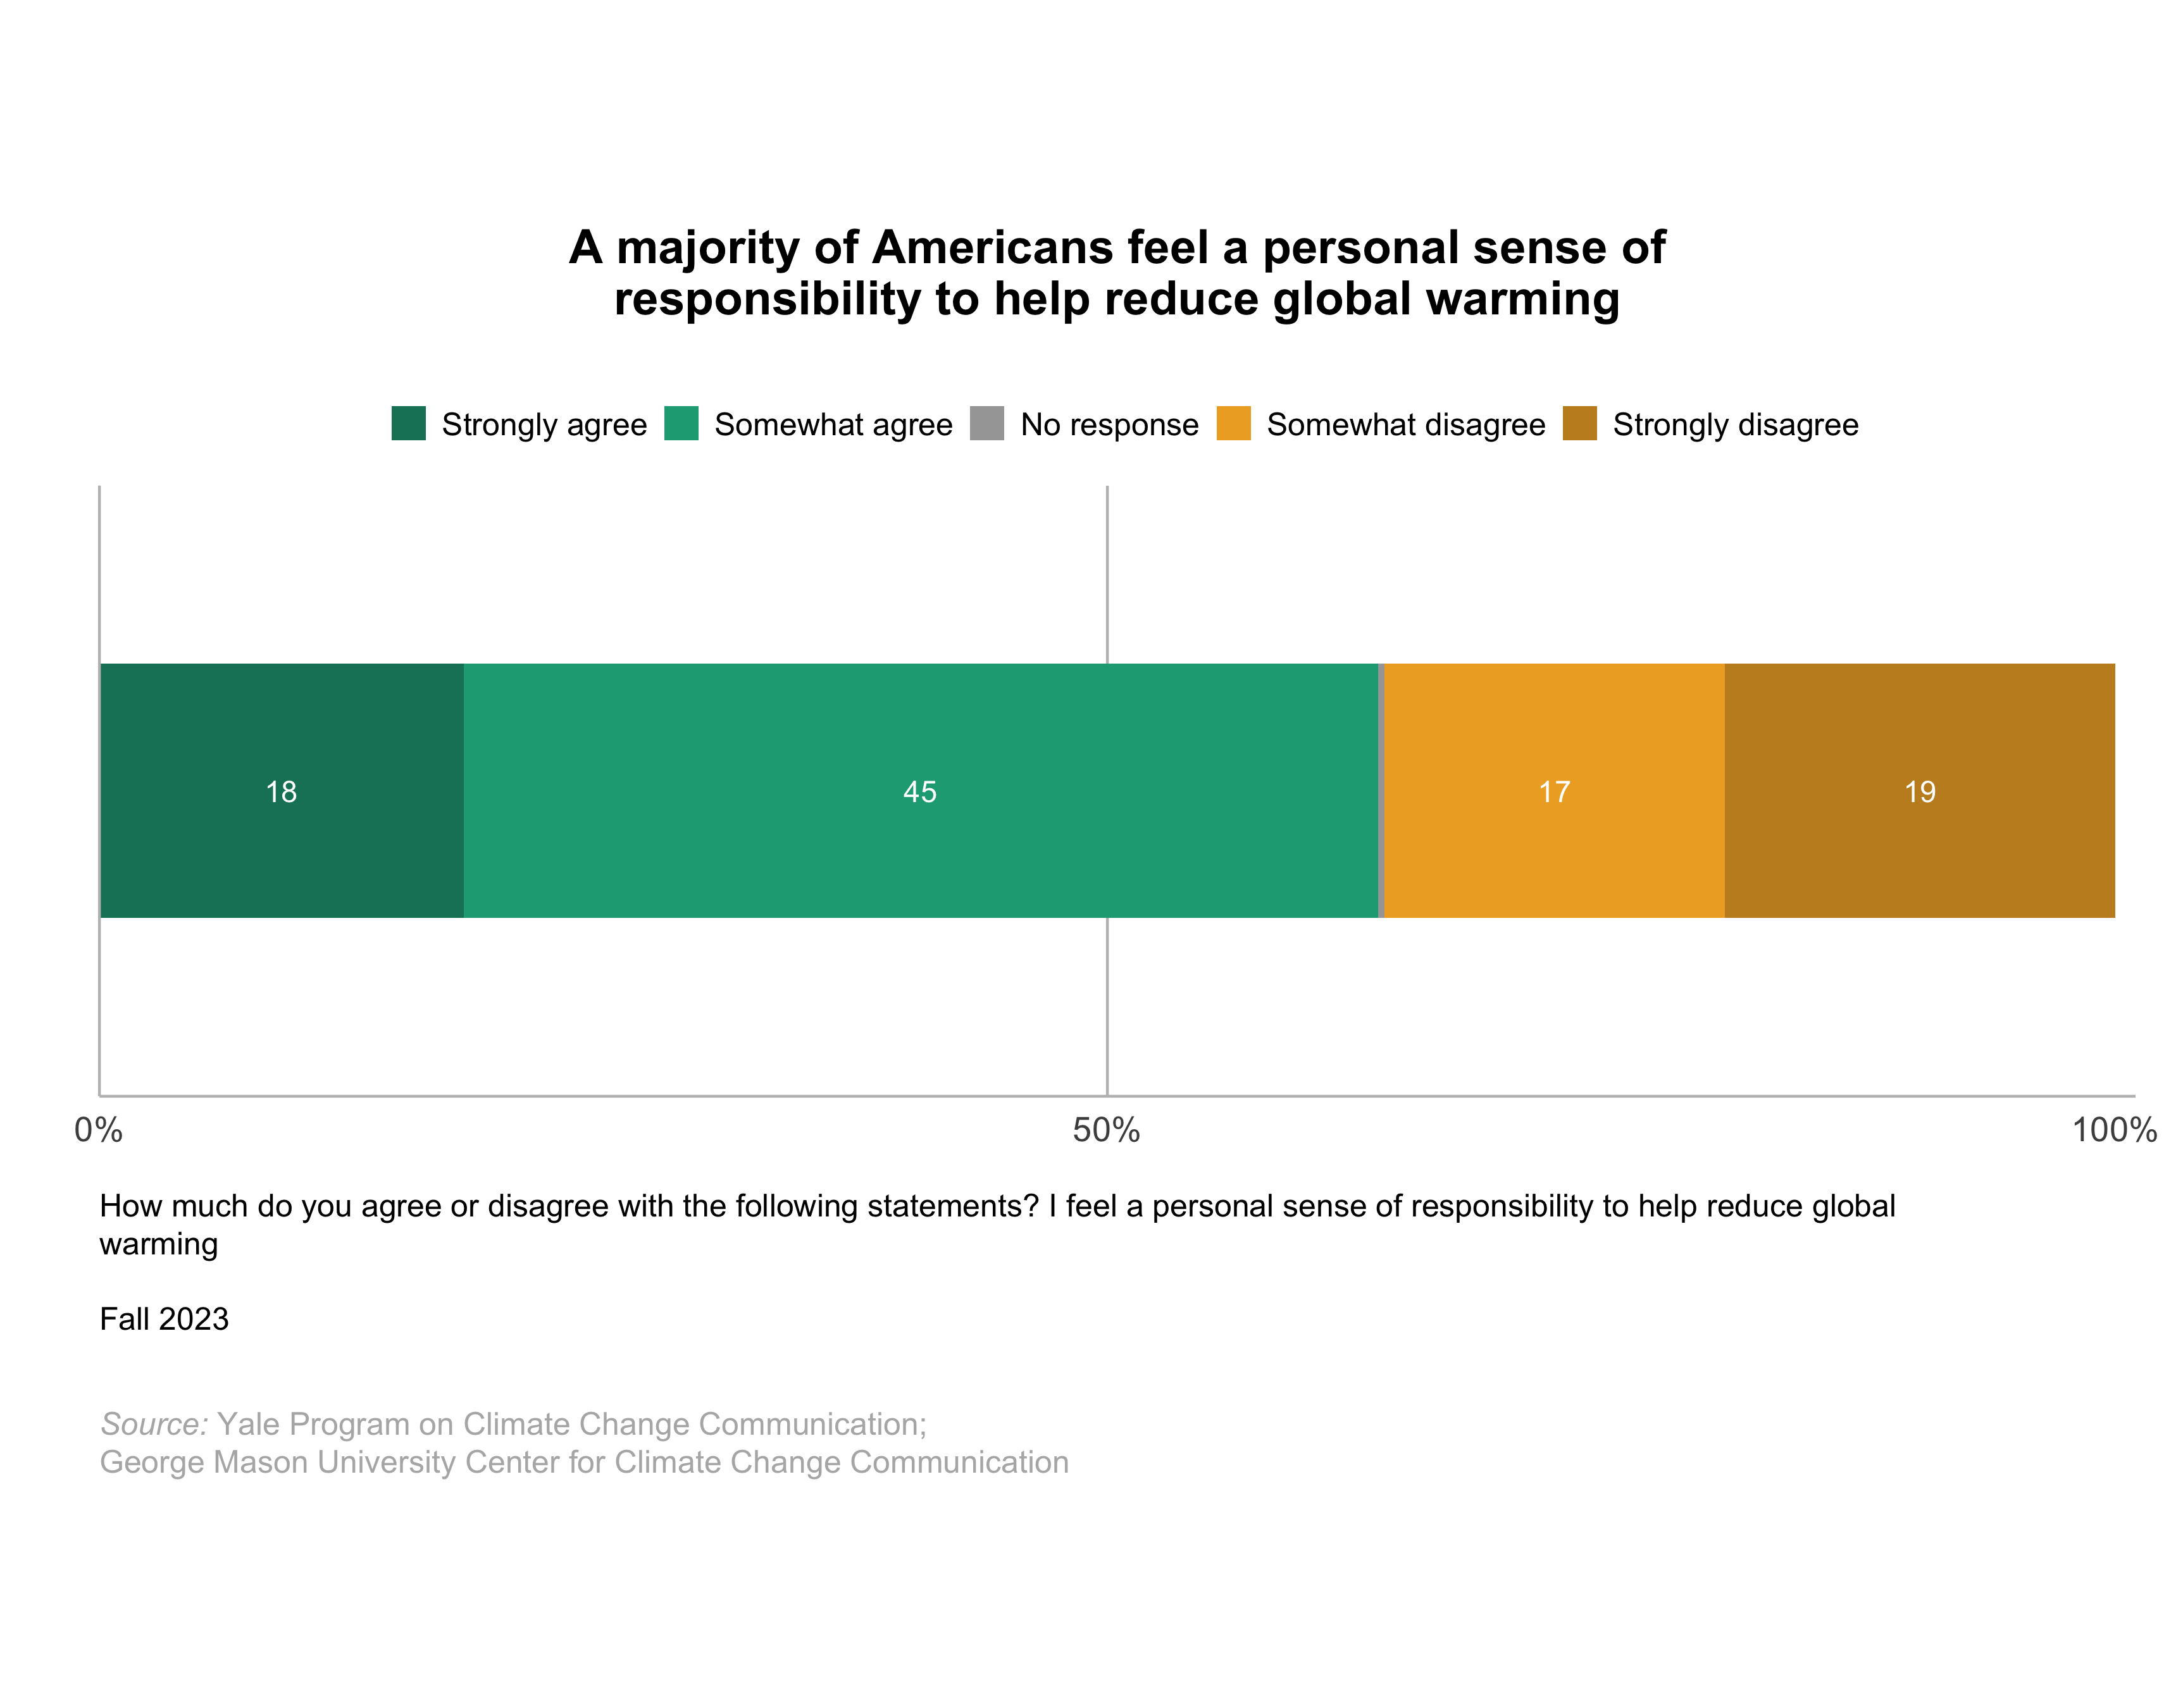 This bar chart shows the percentage of Americans who feel a personal sense of responsibility to help reduce global warming. A majority of Americans feel a personal sense of responsibility to help reduce global warming. Data: Climate Change in the American Mind, Fall 2023. Refer to the data tables in Appendix 1 of the report for all percentages.